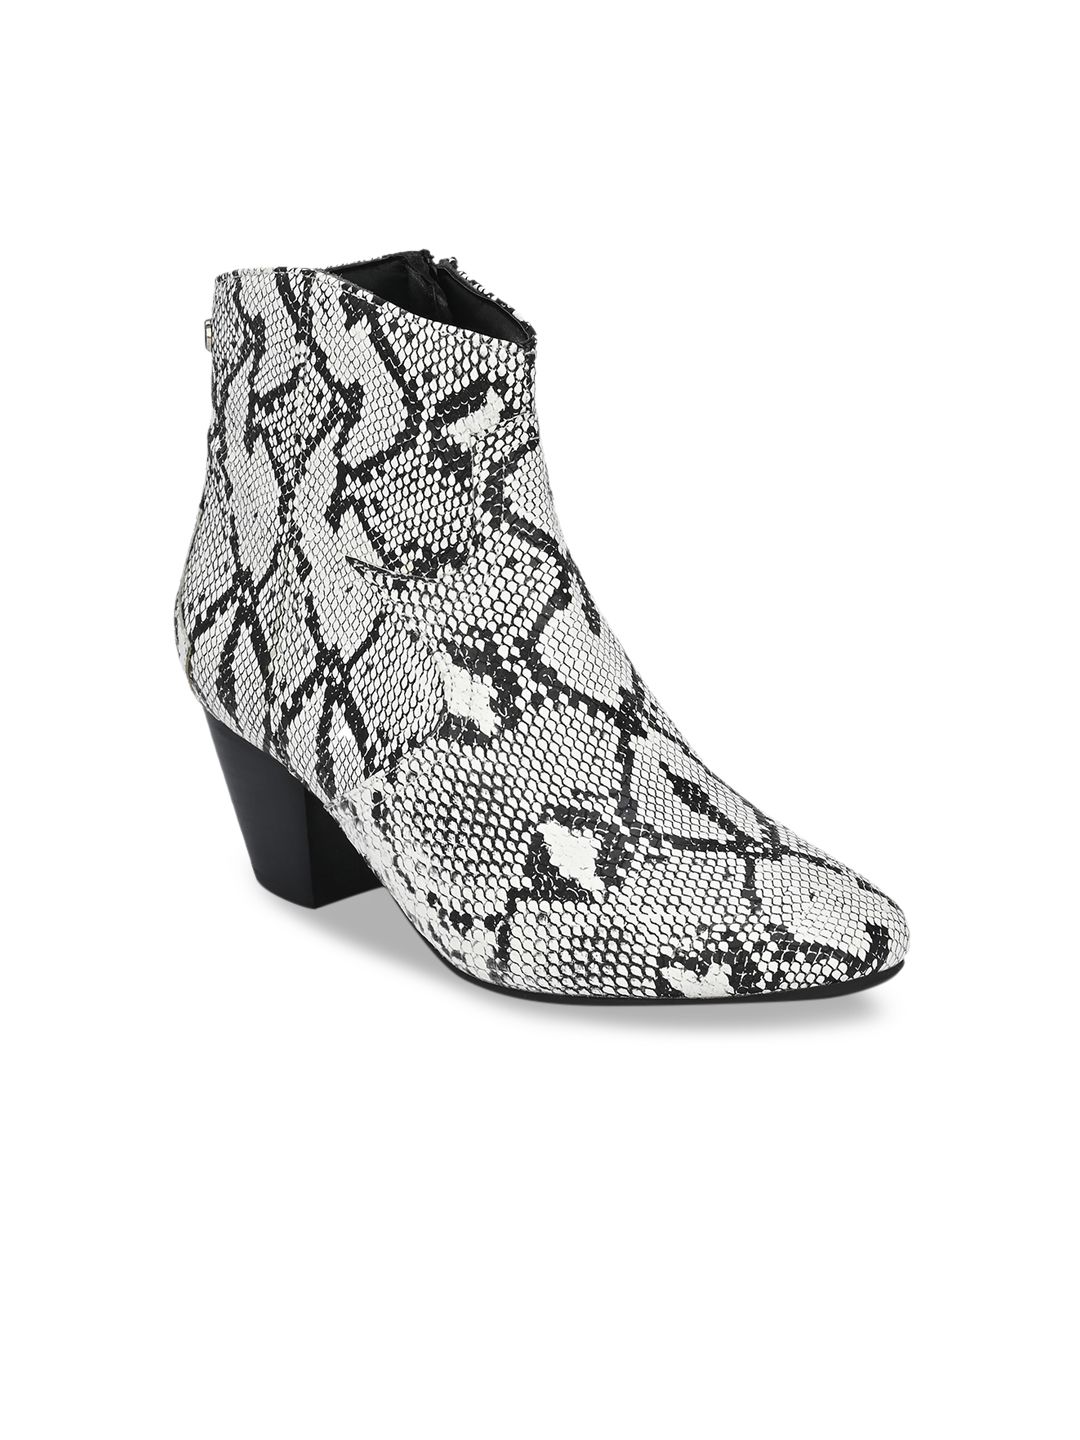 Delize Off White Snake Printed Mid-Top Block Heeled Boots Price in India